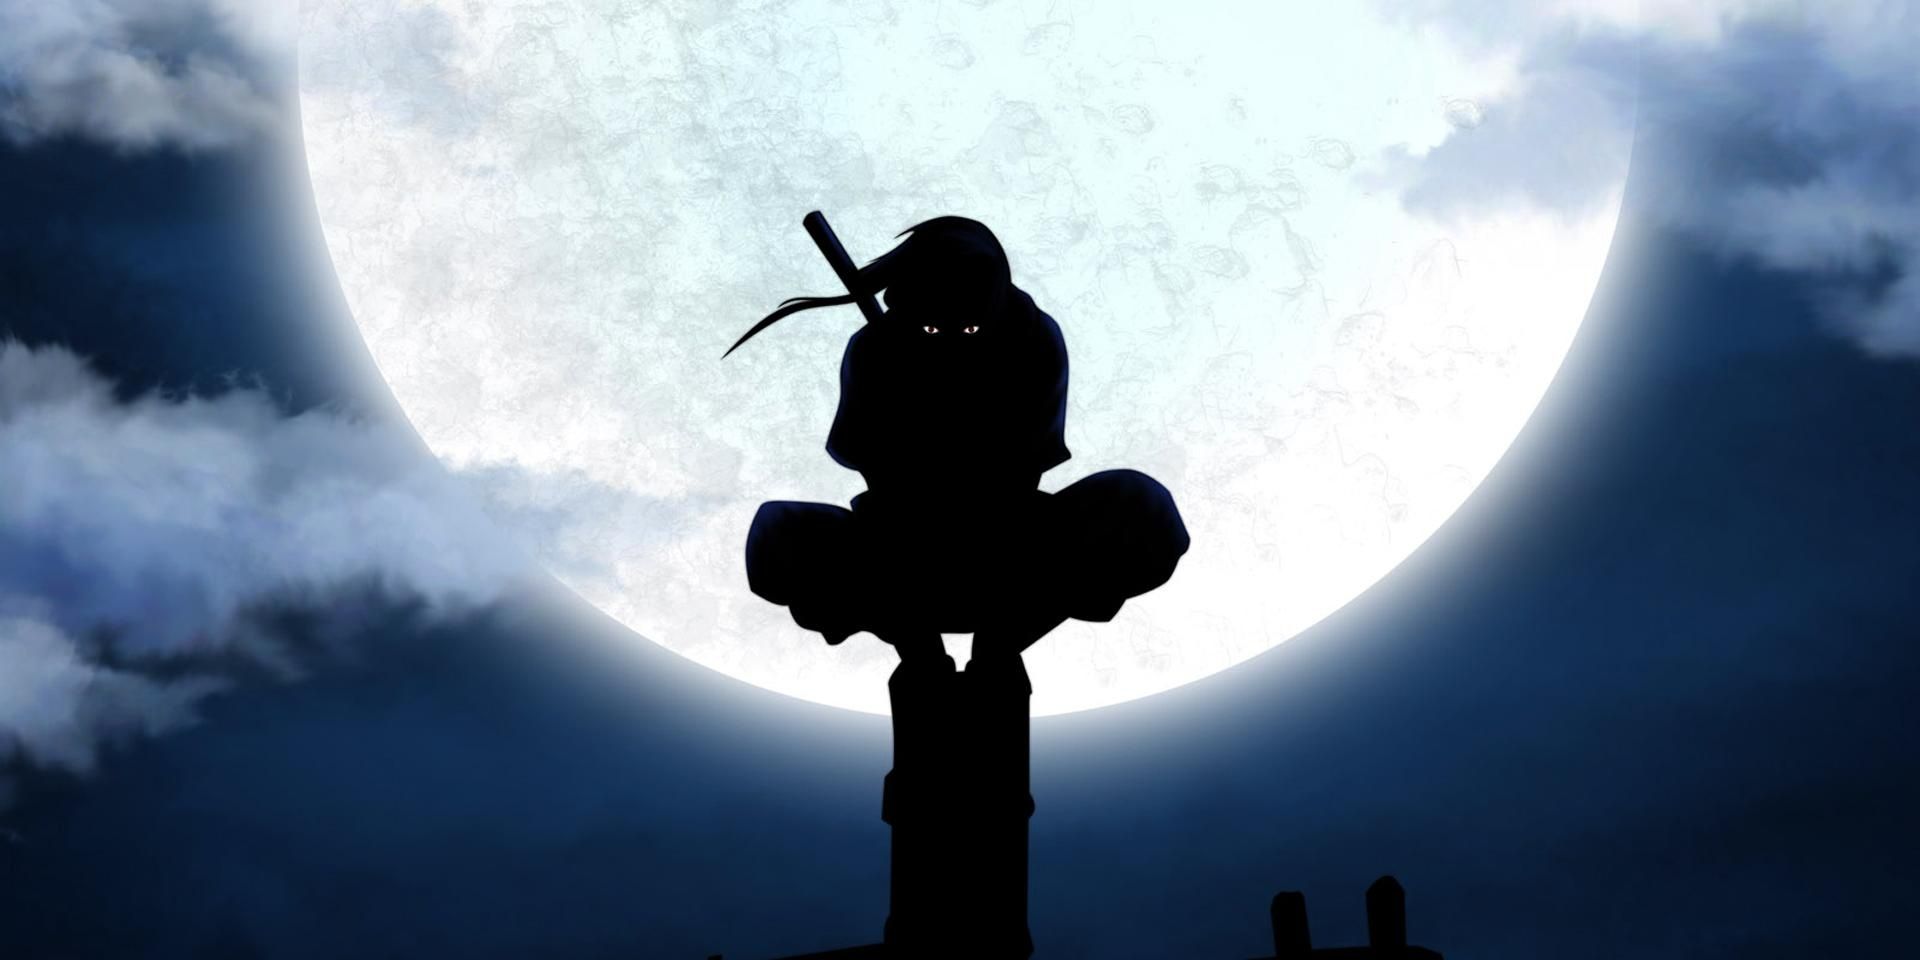 A silhouette of Itachi perched upon a pole in front of a full moon.